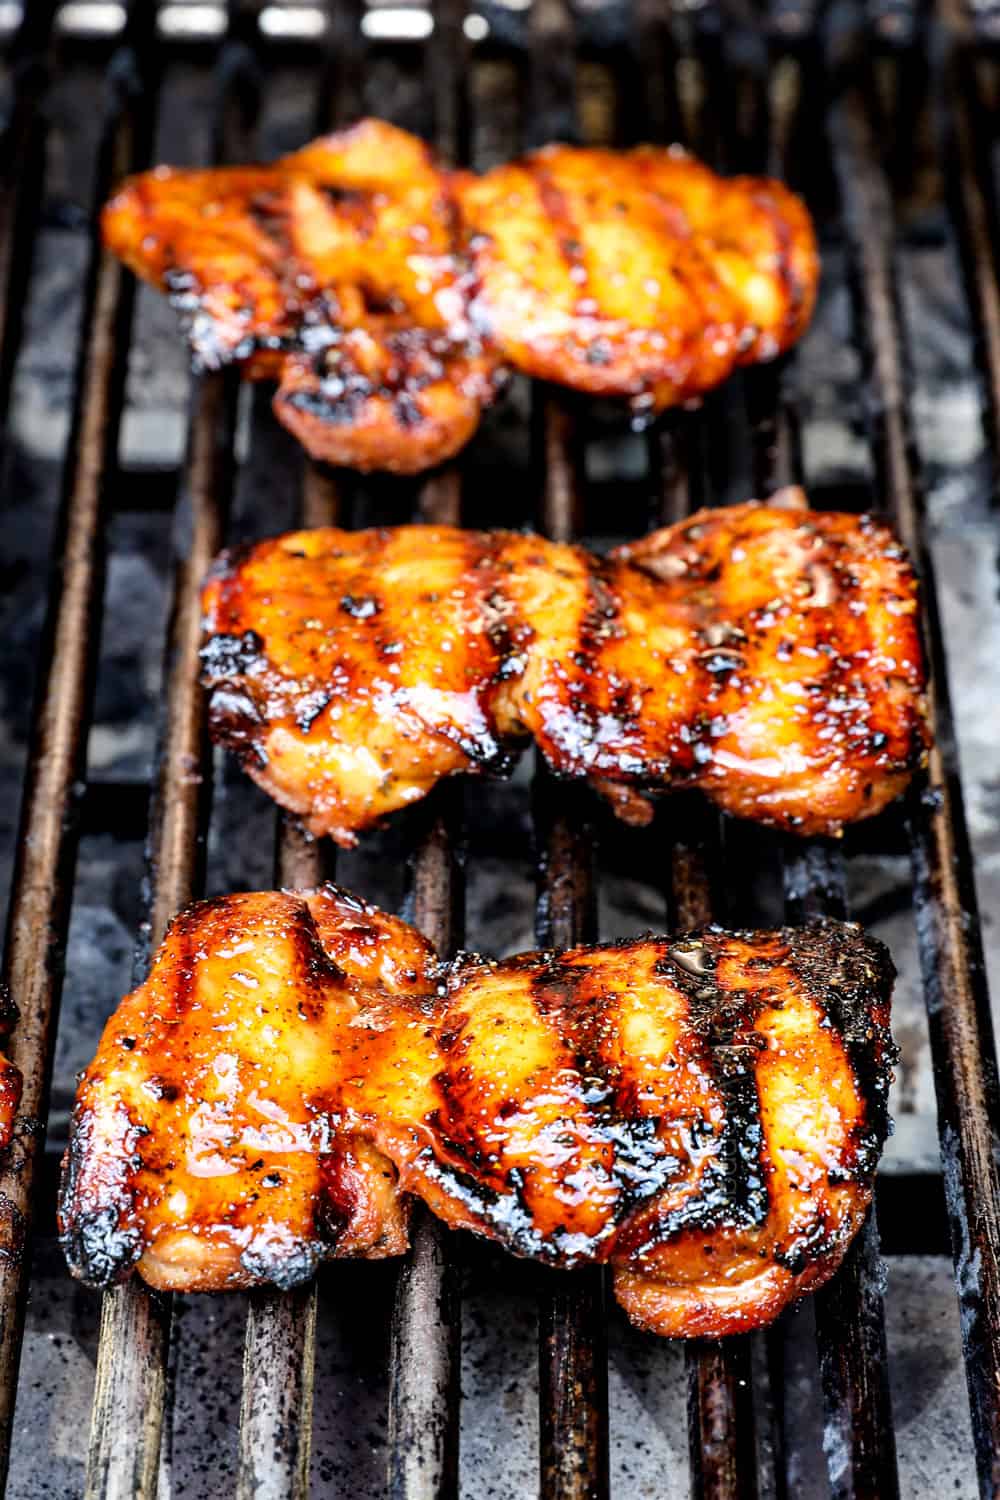 showing how to make grilled chicken thighs by grilling on the grill until seared and golden